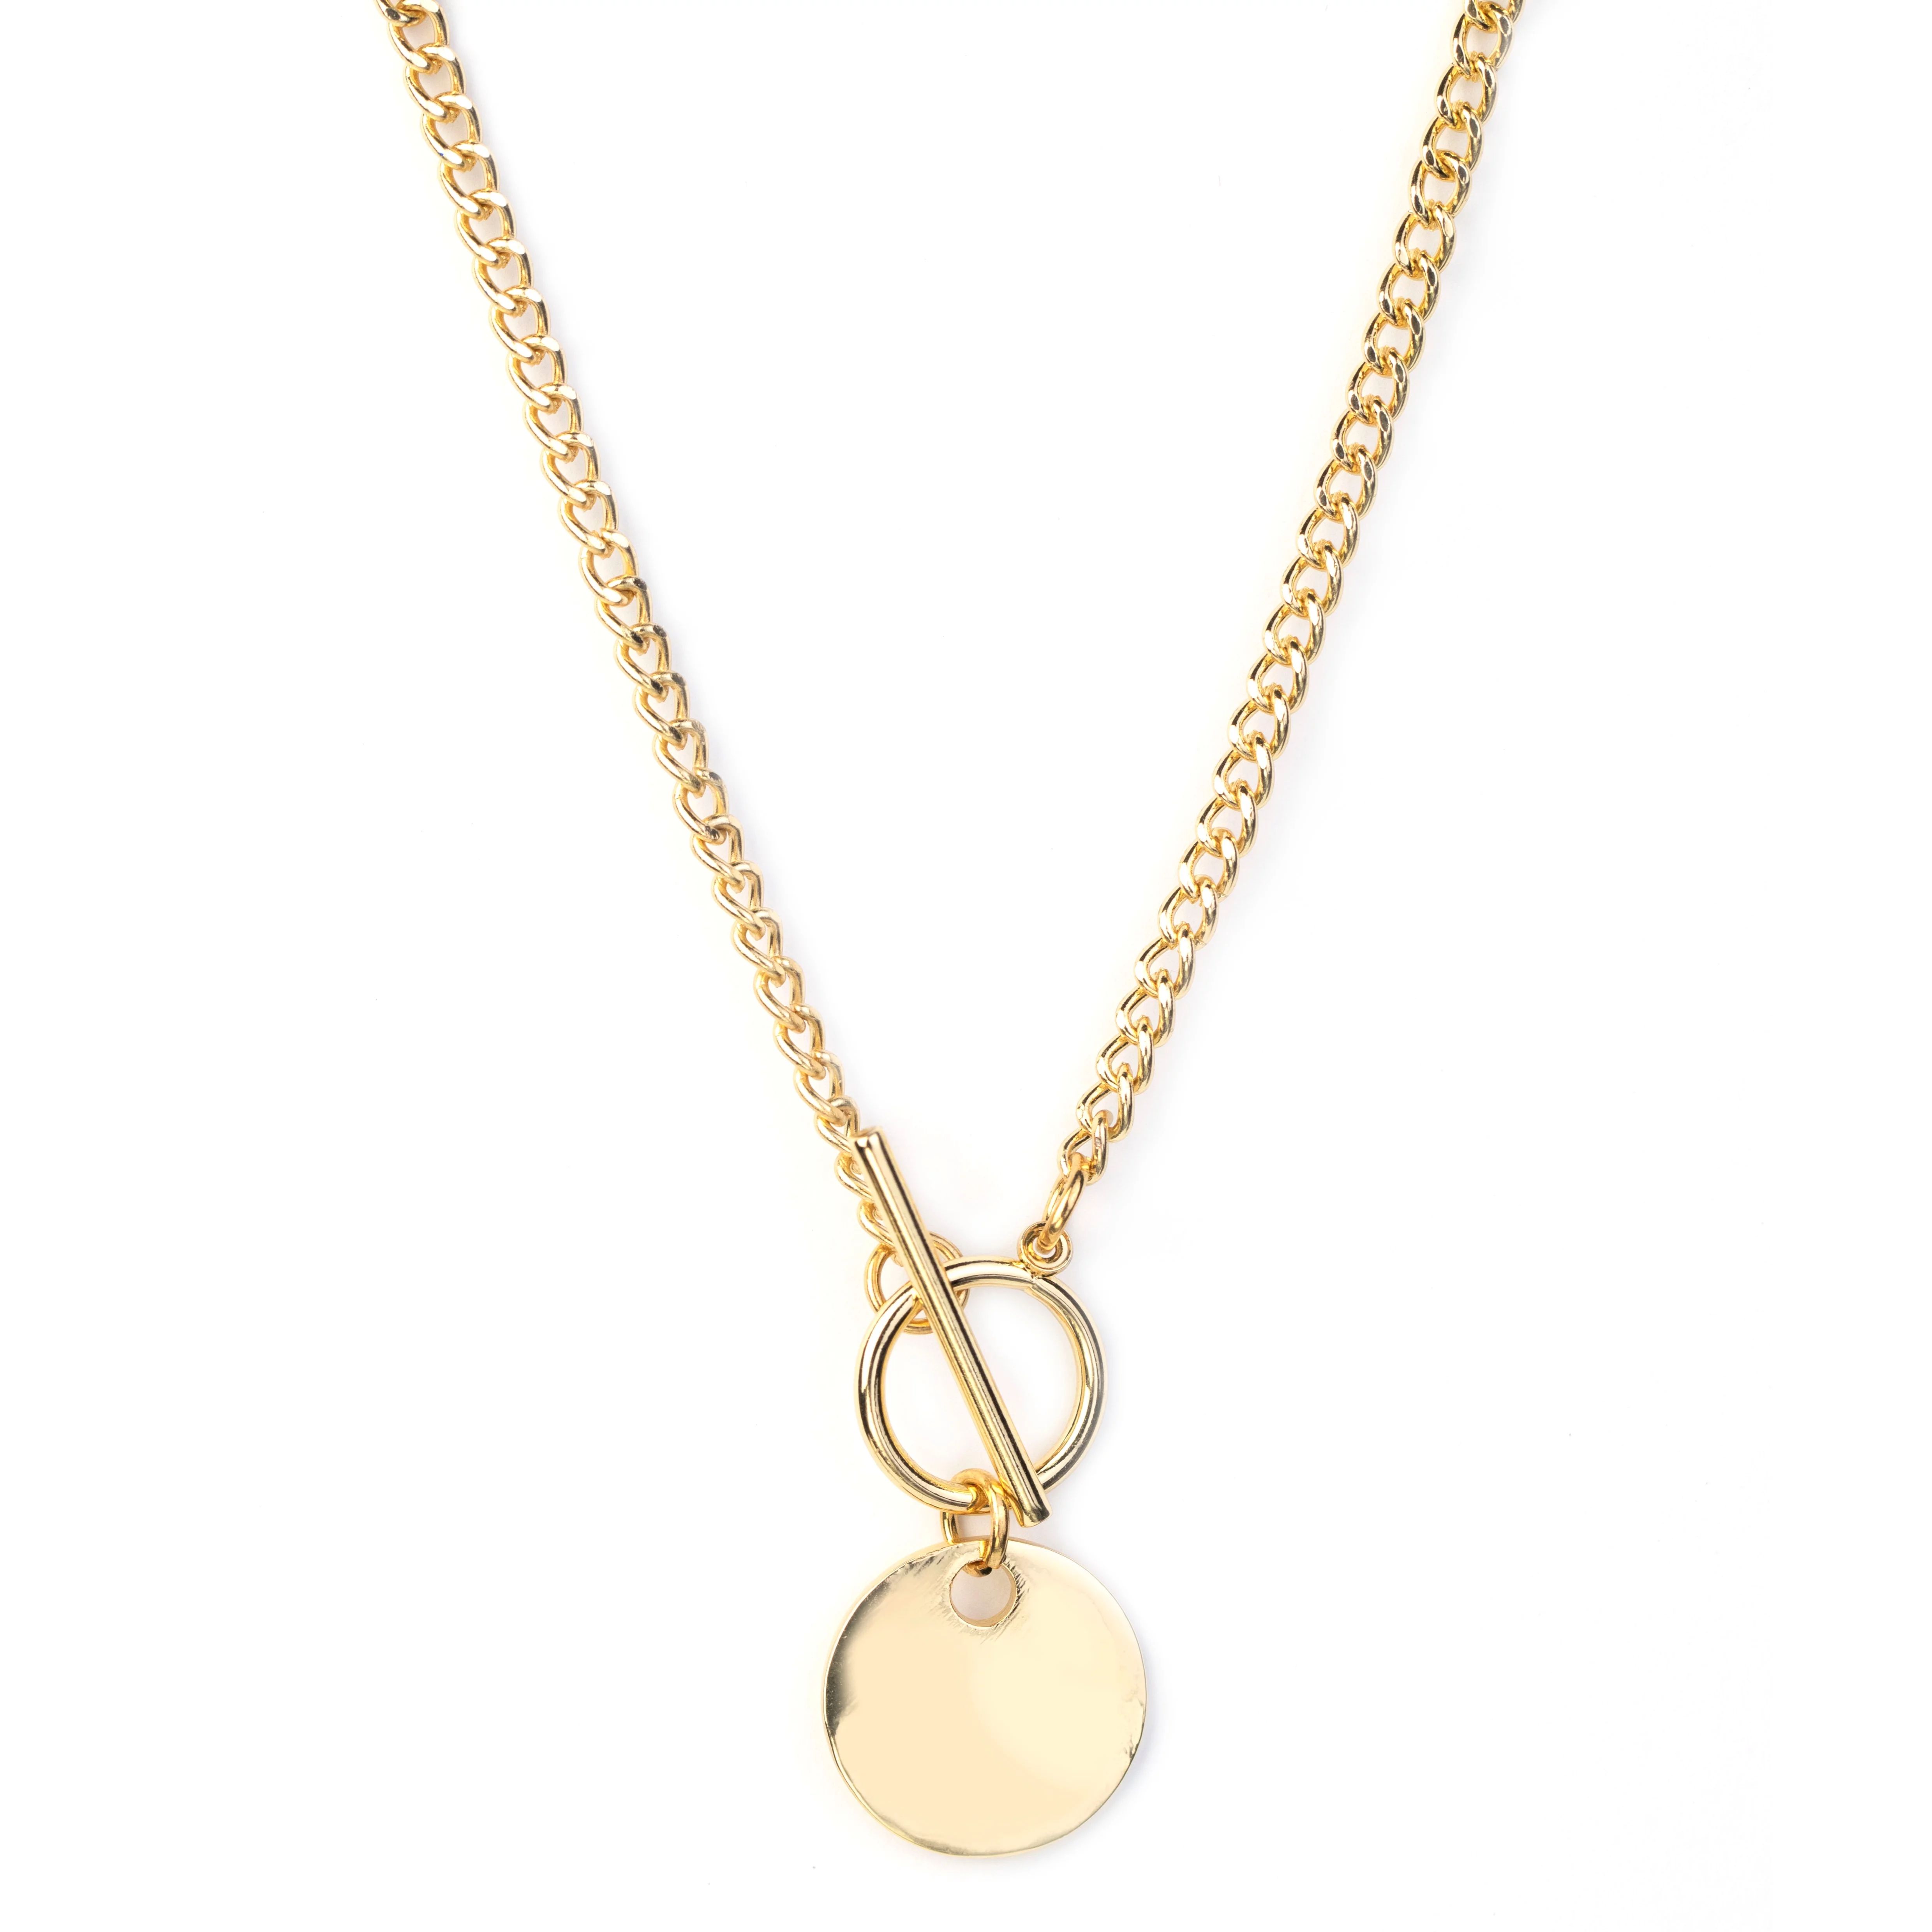 Minimal Golden Pendant Necklace - 18K Yellow Gold Plating over Silver - Curby Chain Necklace for ... | Walmart (US)